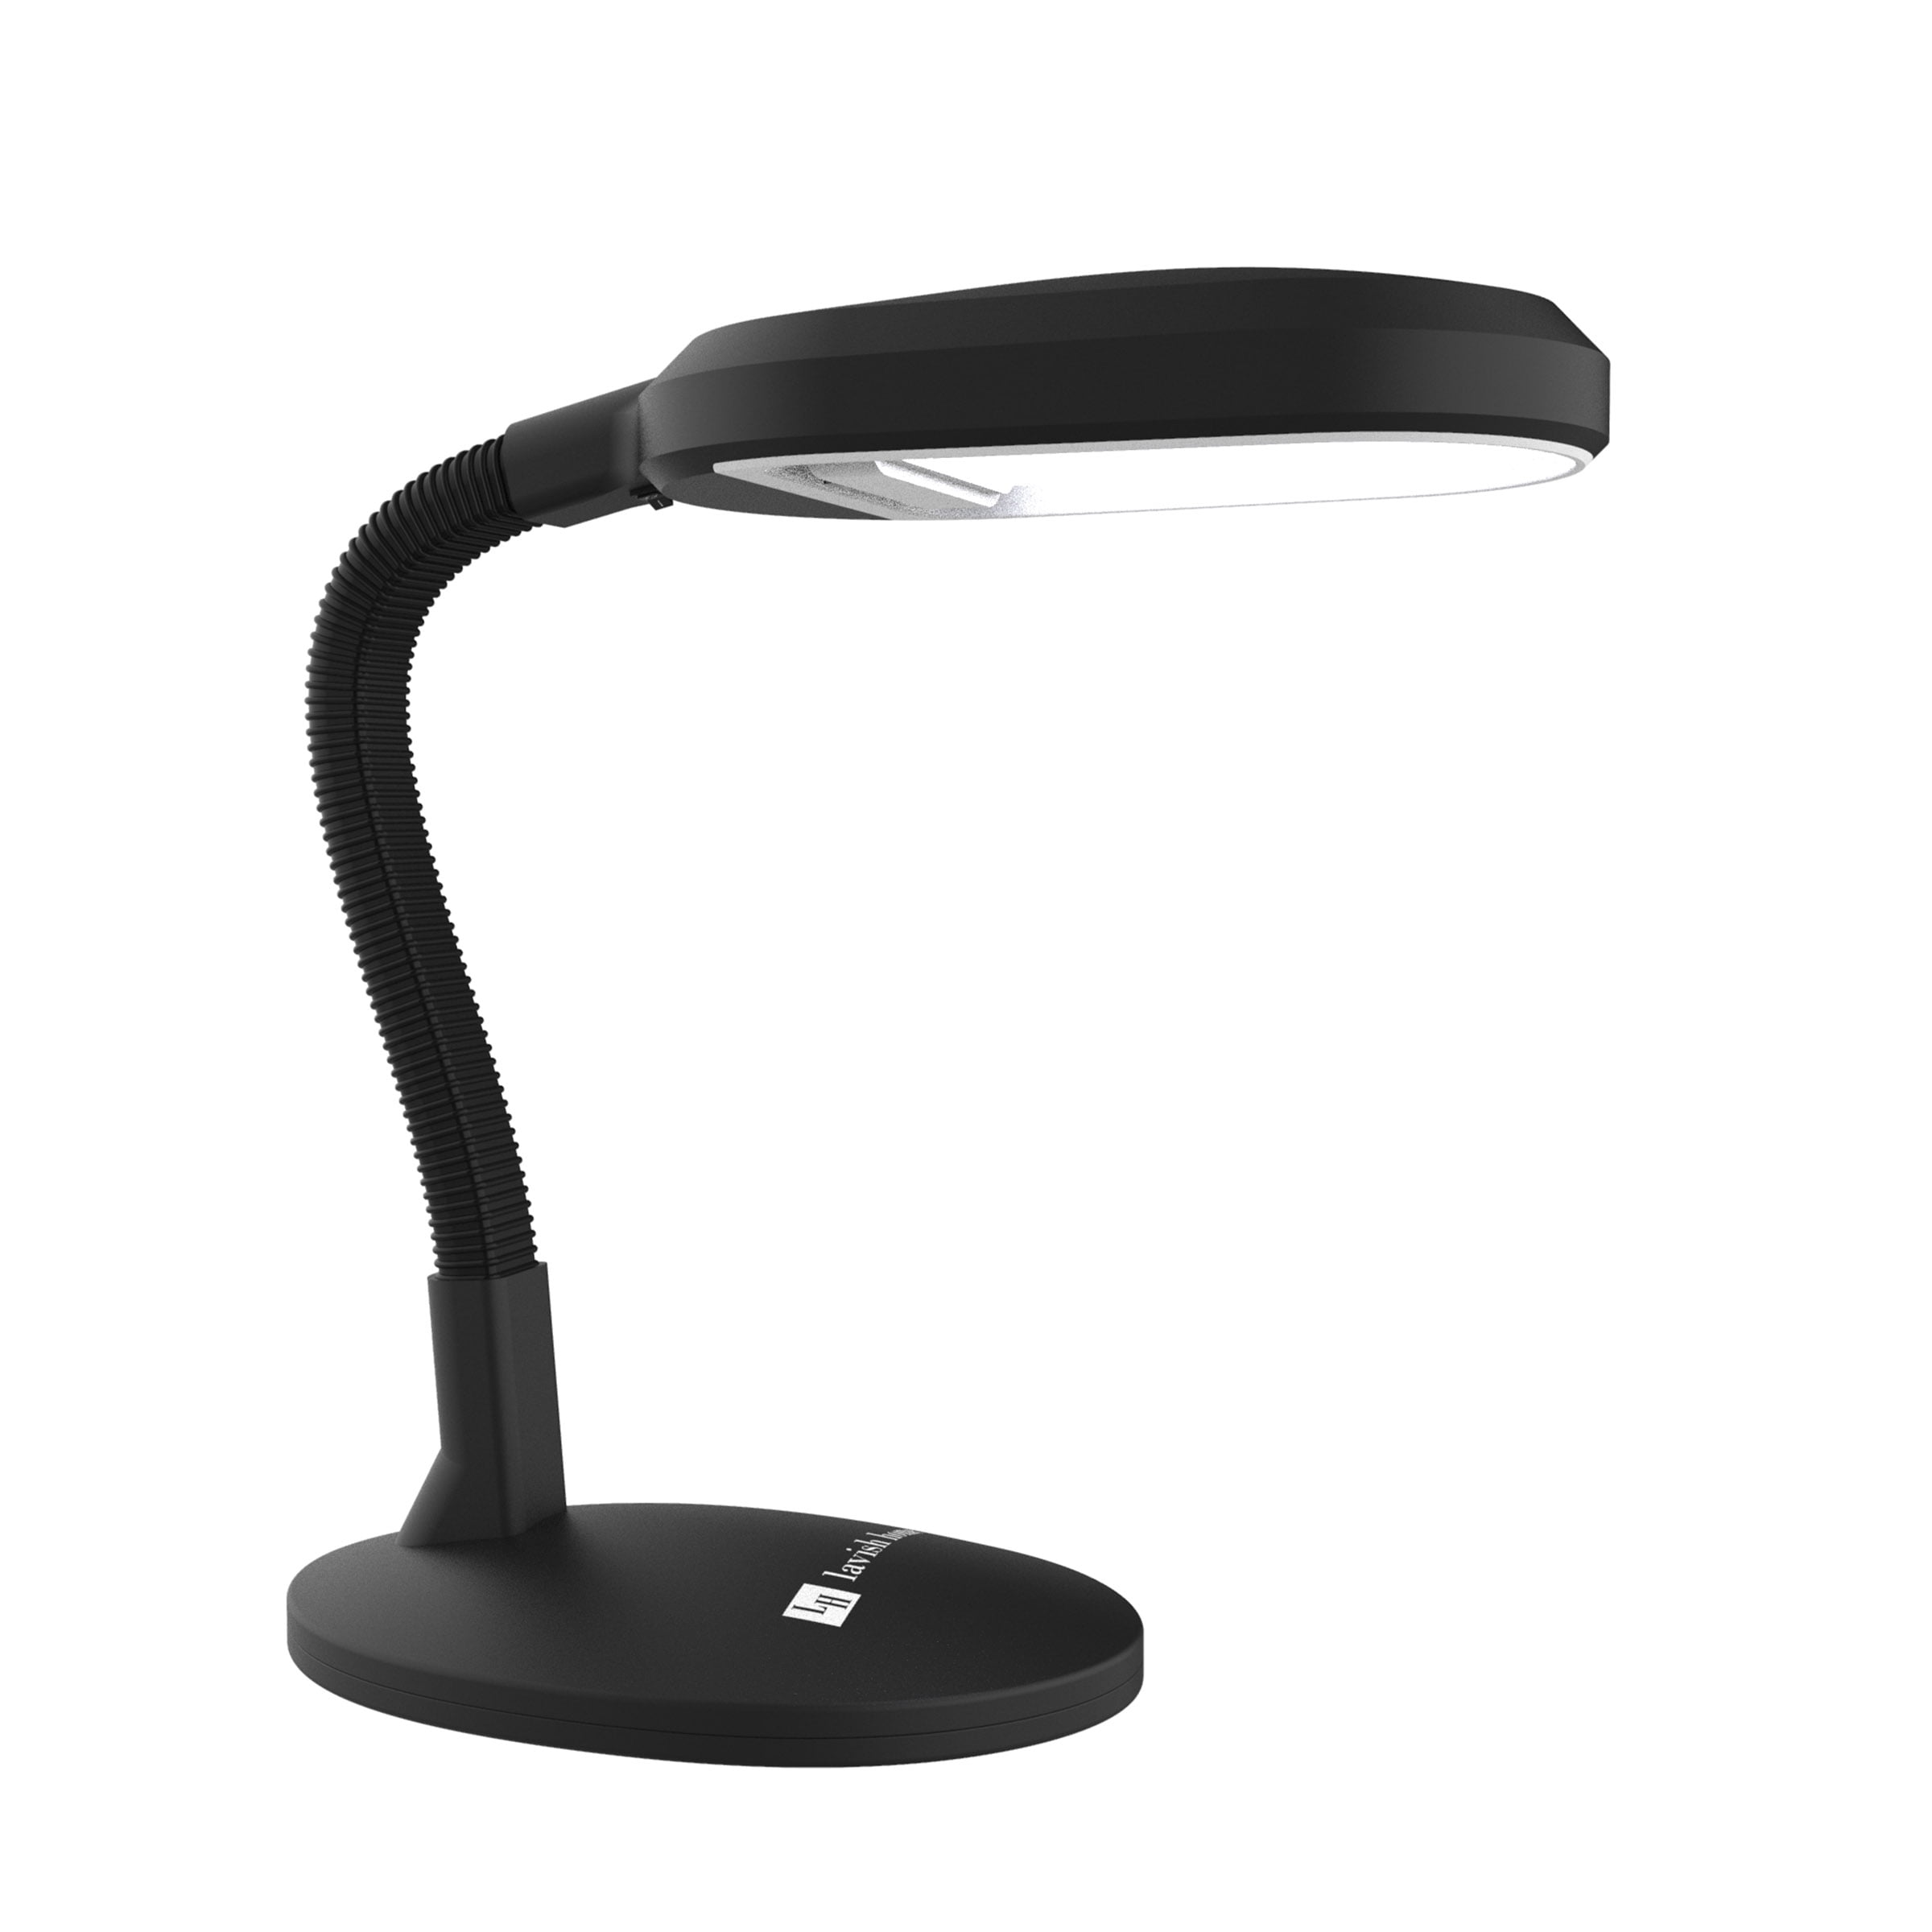 Natural Sunlight Desk Lamp Adjustable, How To Use Table Lamp